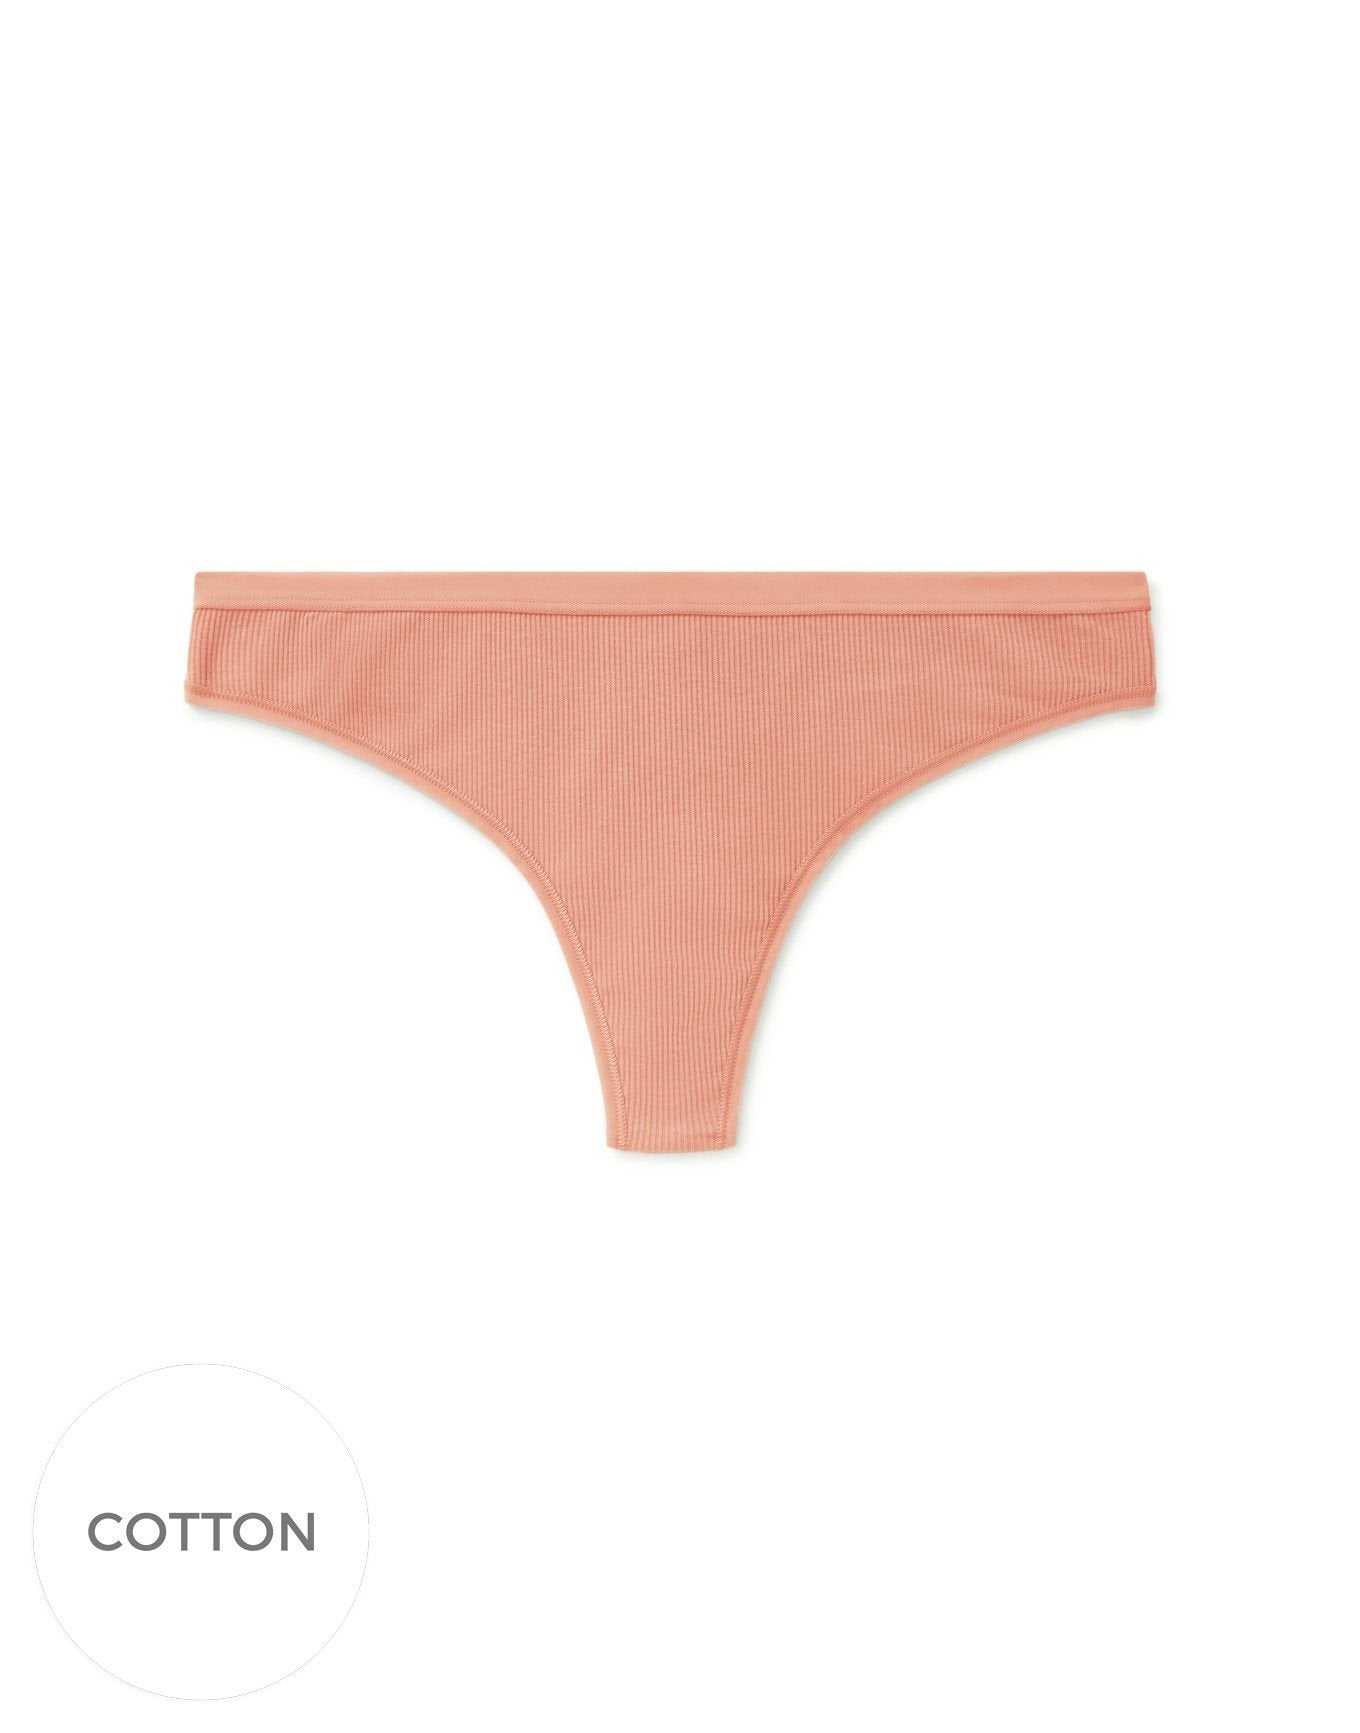 Adore Me Alexandra Ribbed Cotton Thong in color ROSEBUD 91S7 and shape thong